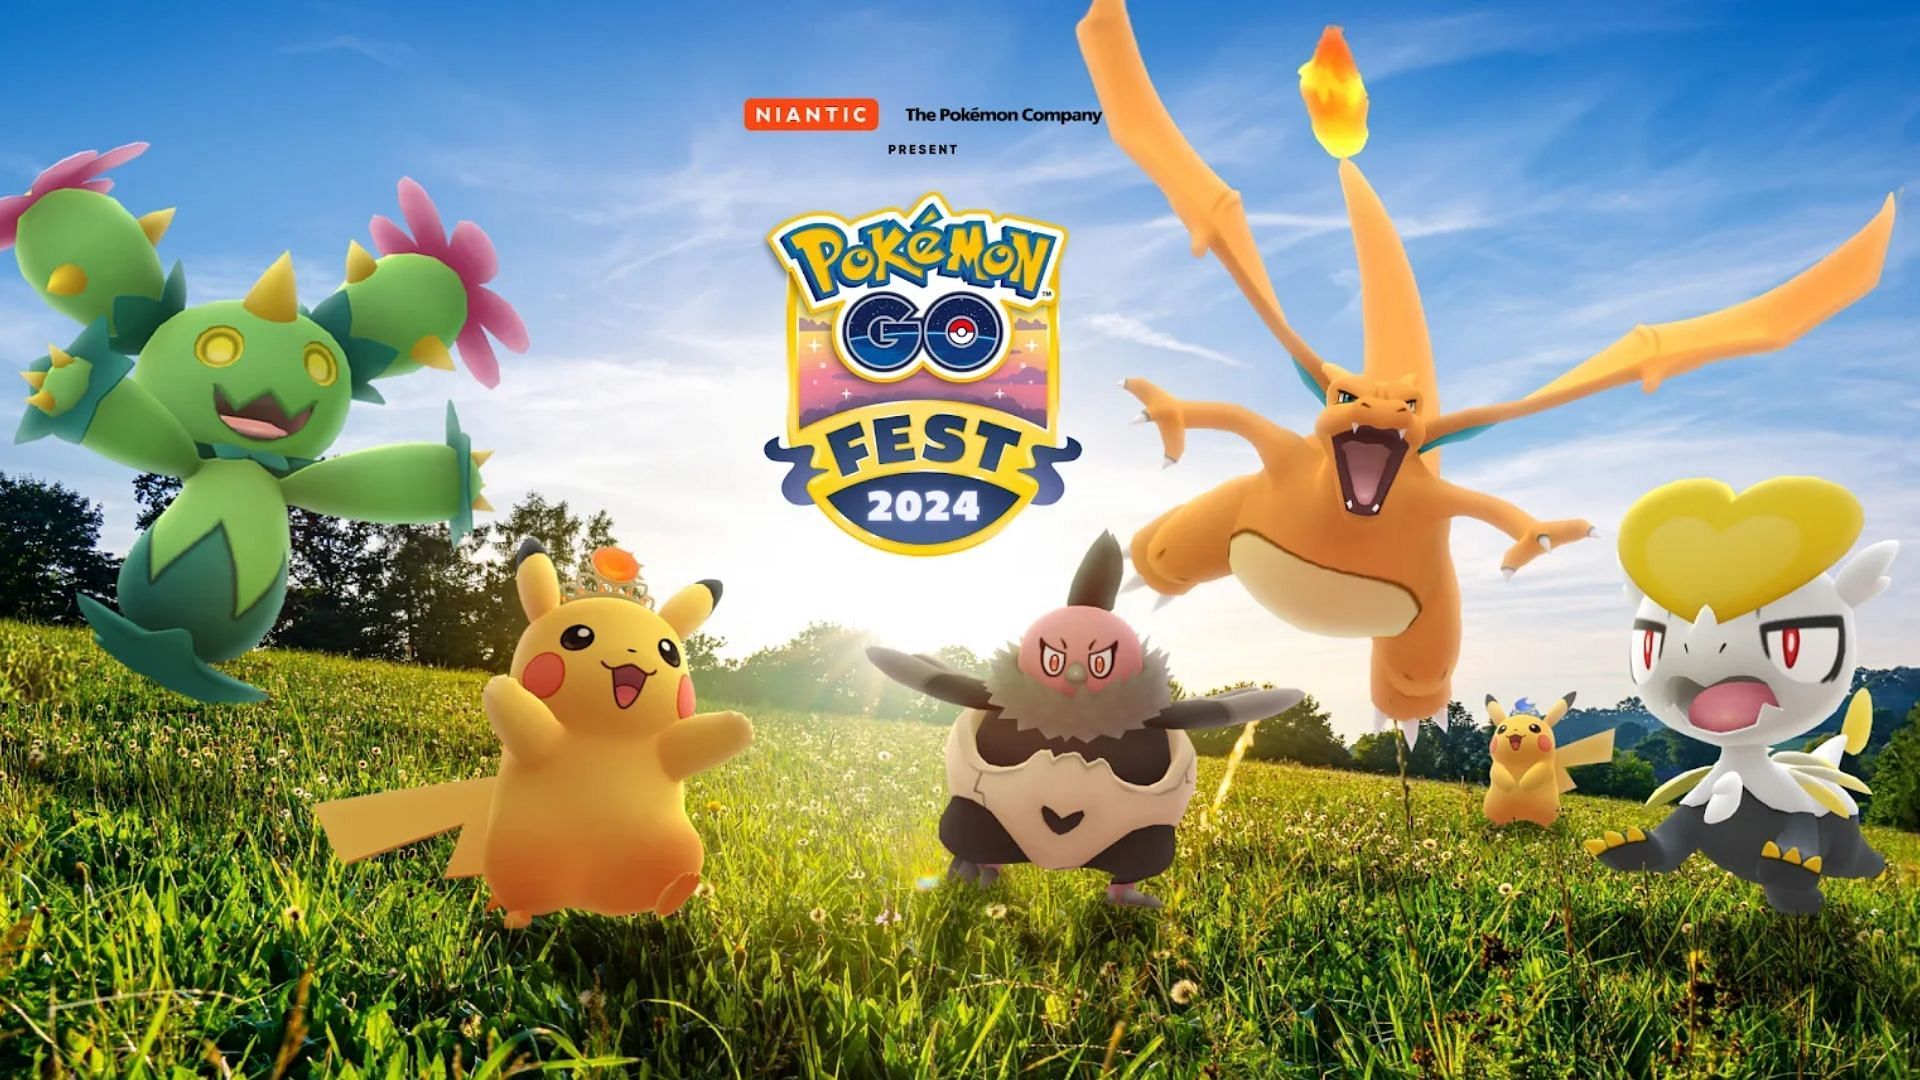 The official cover image of the GO Fest 2024 event (Image via The Pokemon Company)